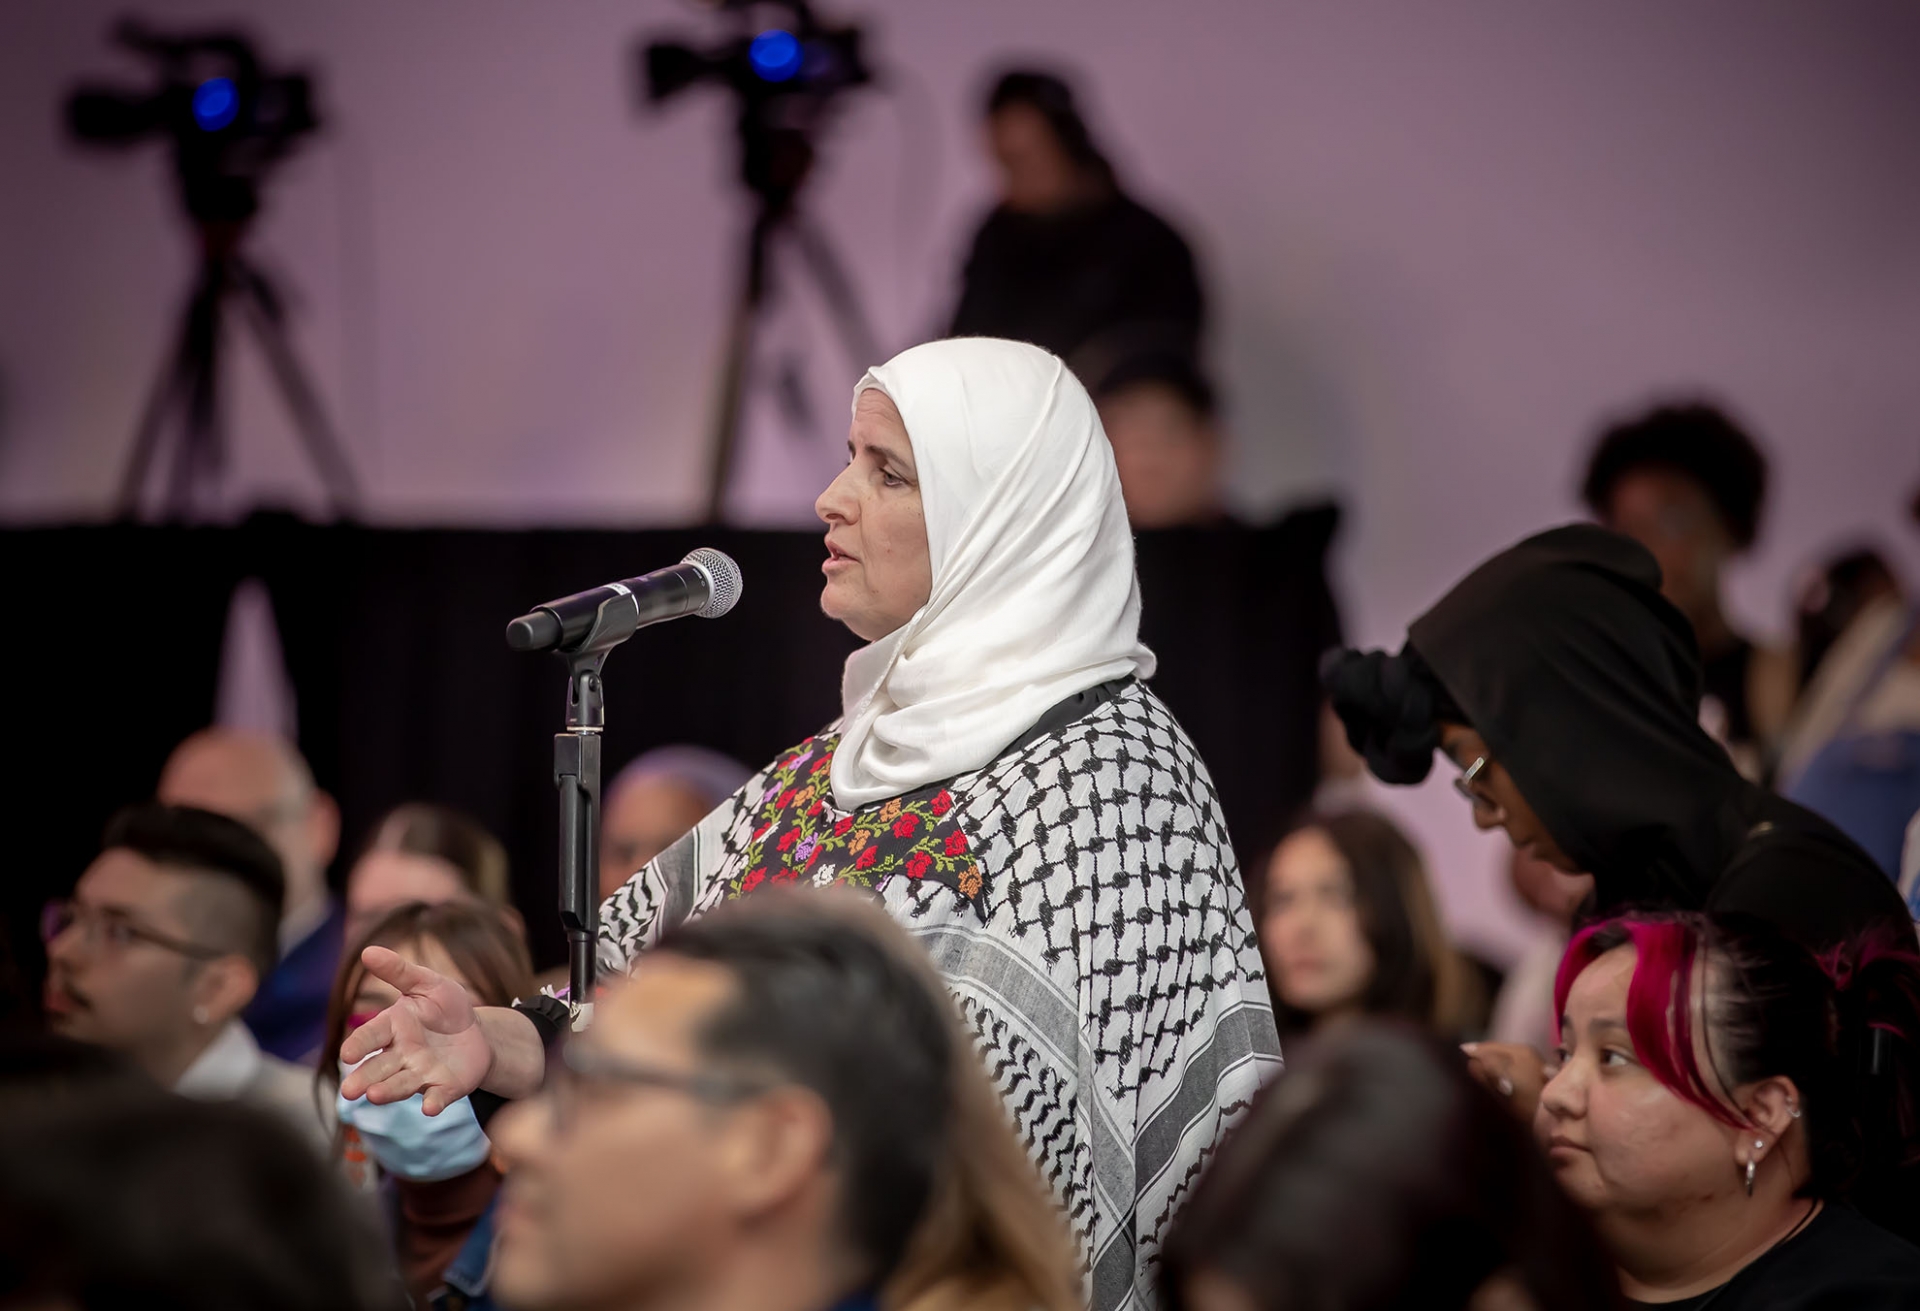 Ahlam Muhtaseb, CSUSB professor of media studies, asked Davis a question about her “committed, unwavering, radically principled stance on Palestine.”